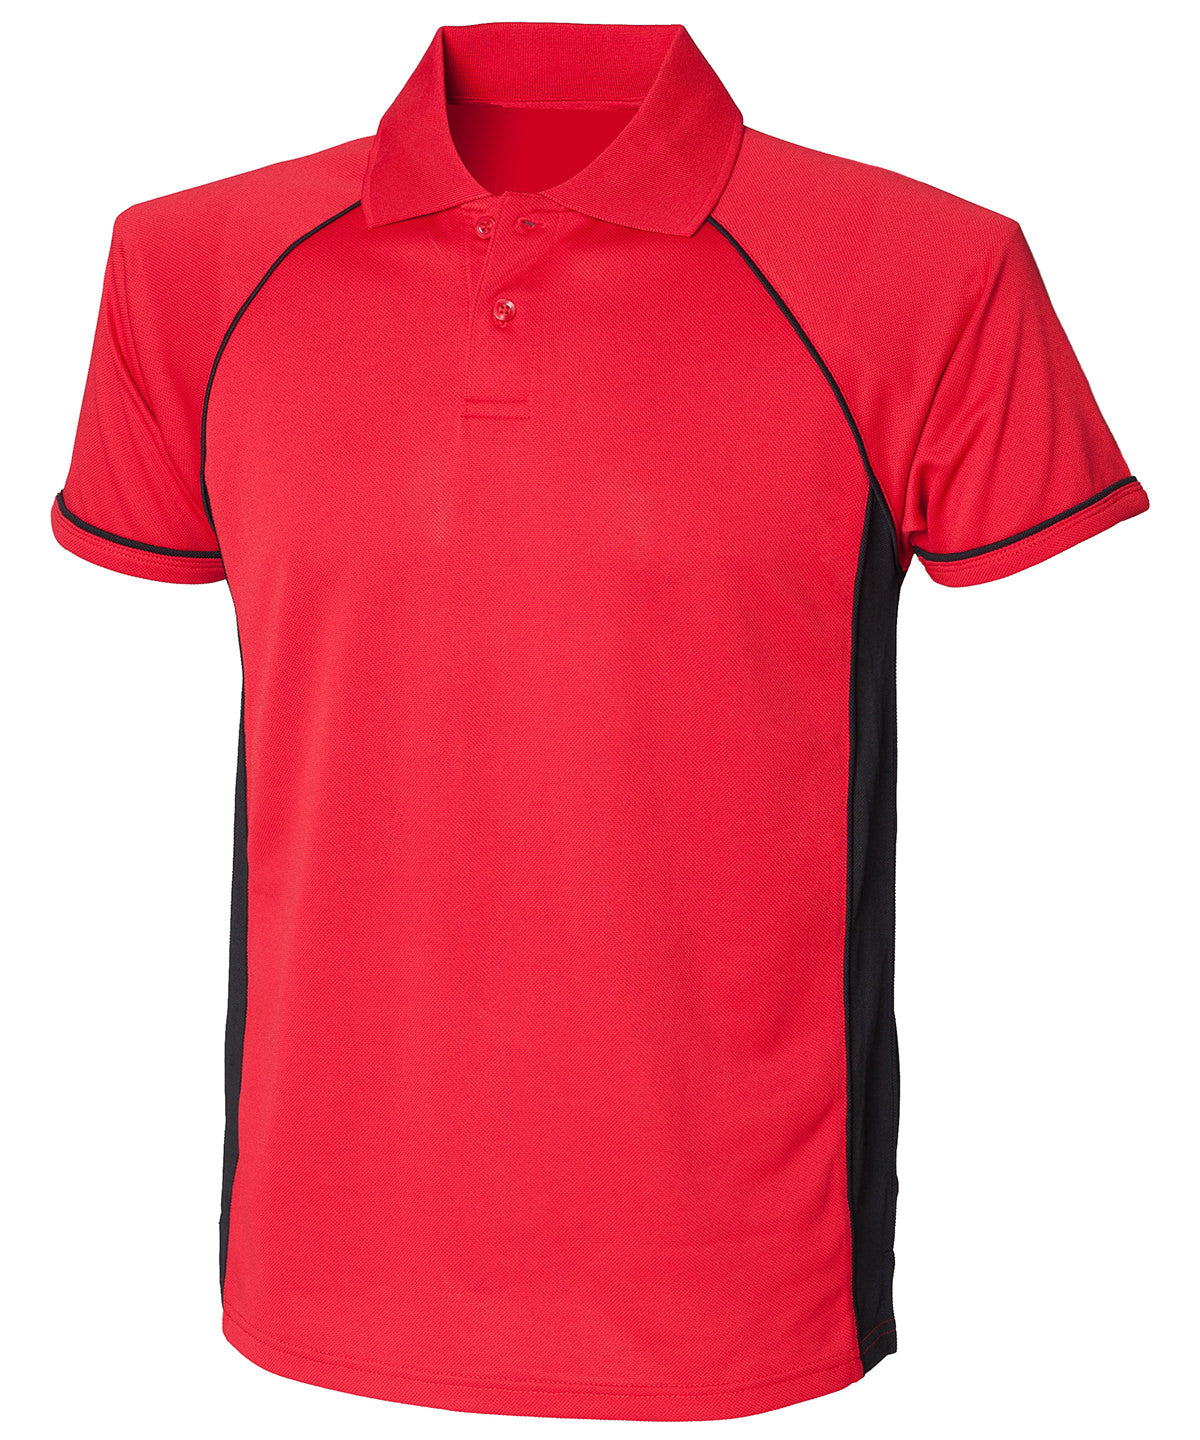 Personalised Polo Shirts - Black Finden & Hales Panel performance polo